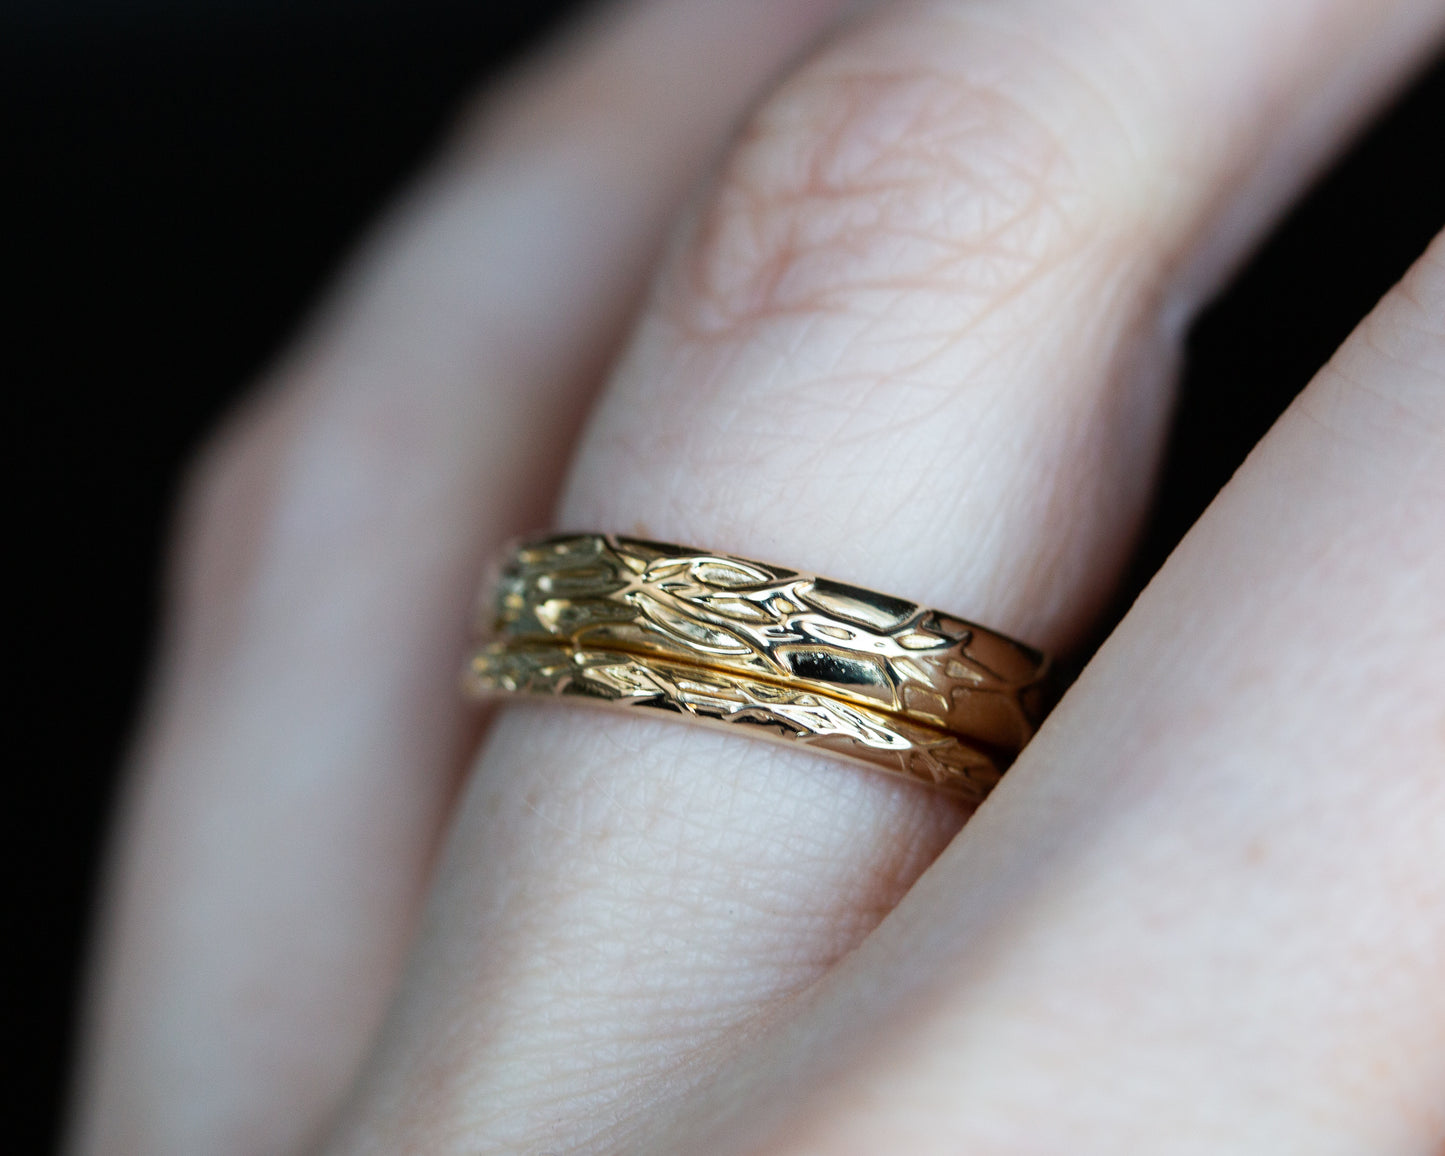 Men Wedding Band crown of thorns in two tone gold